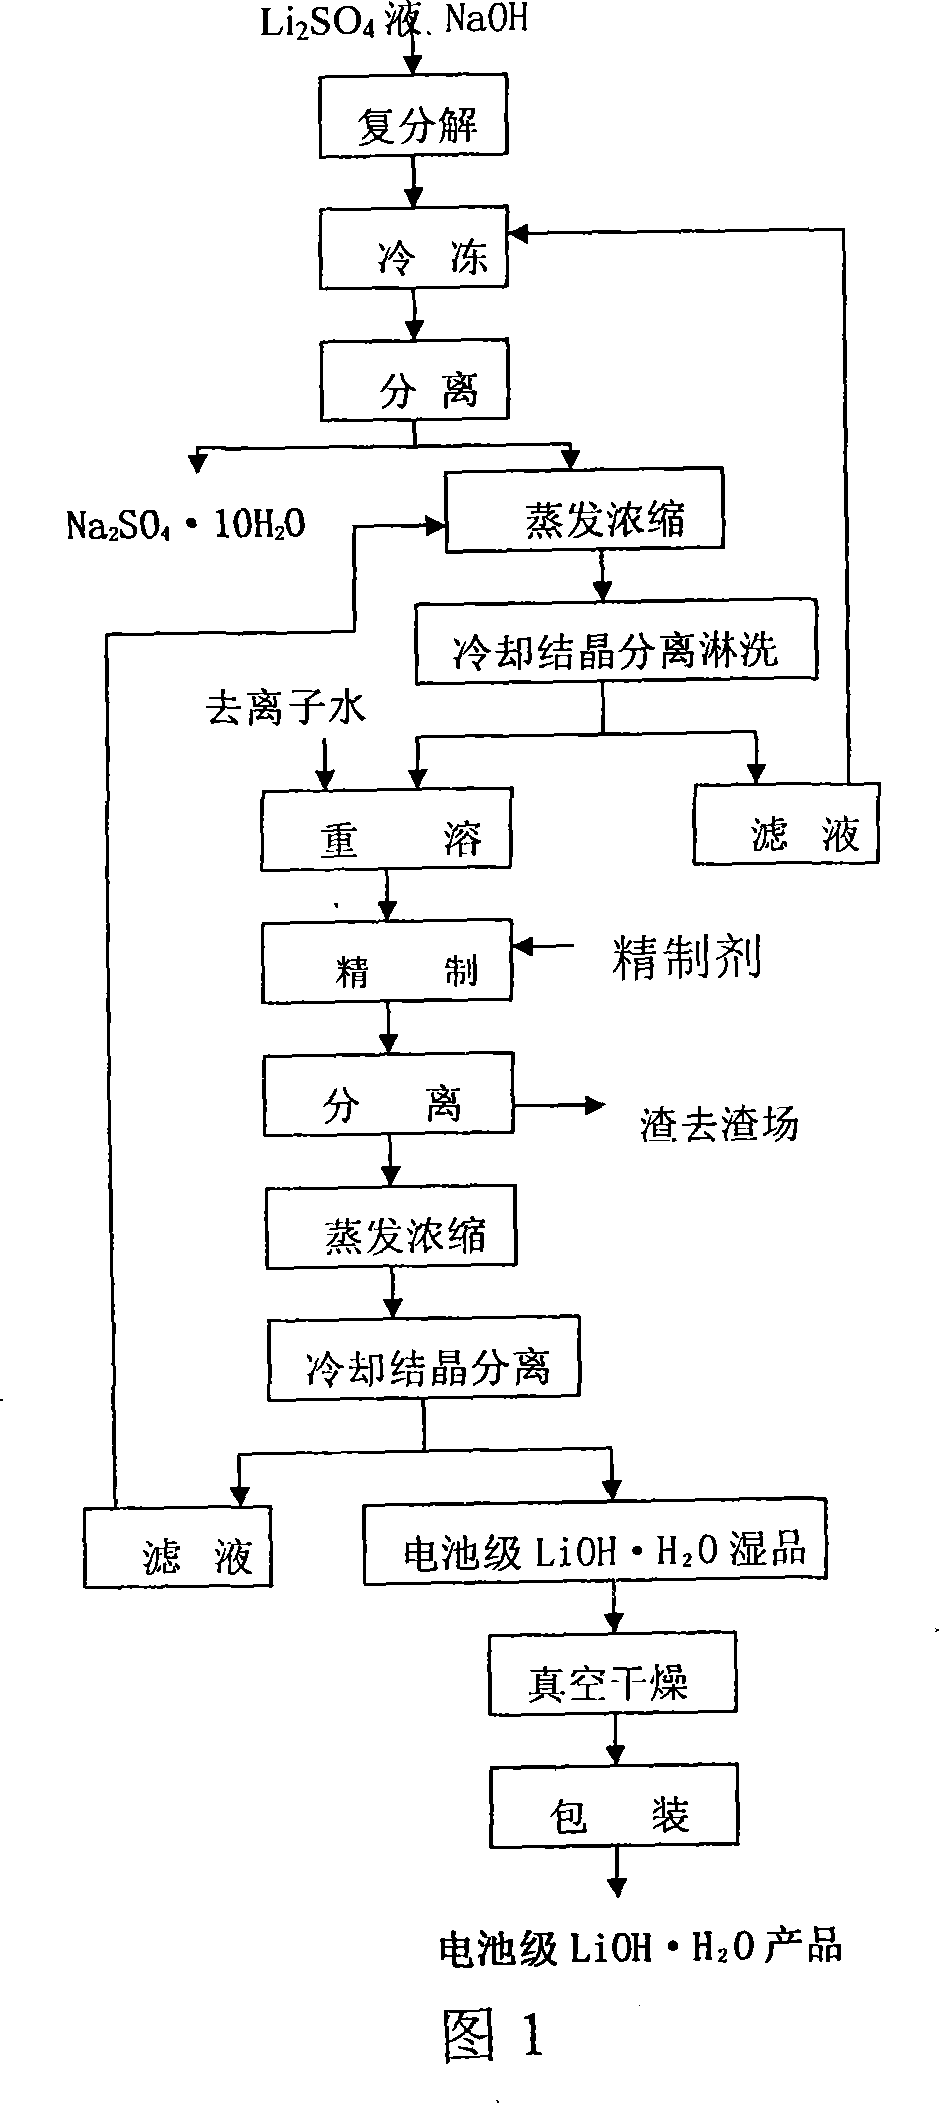 Method for preparing battery-stage monohydrate lithium hydroxide